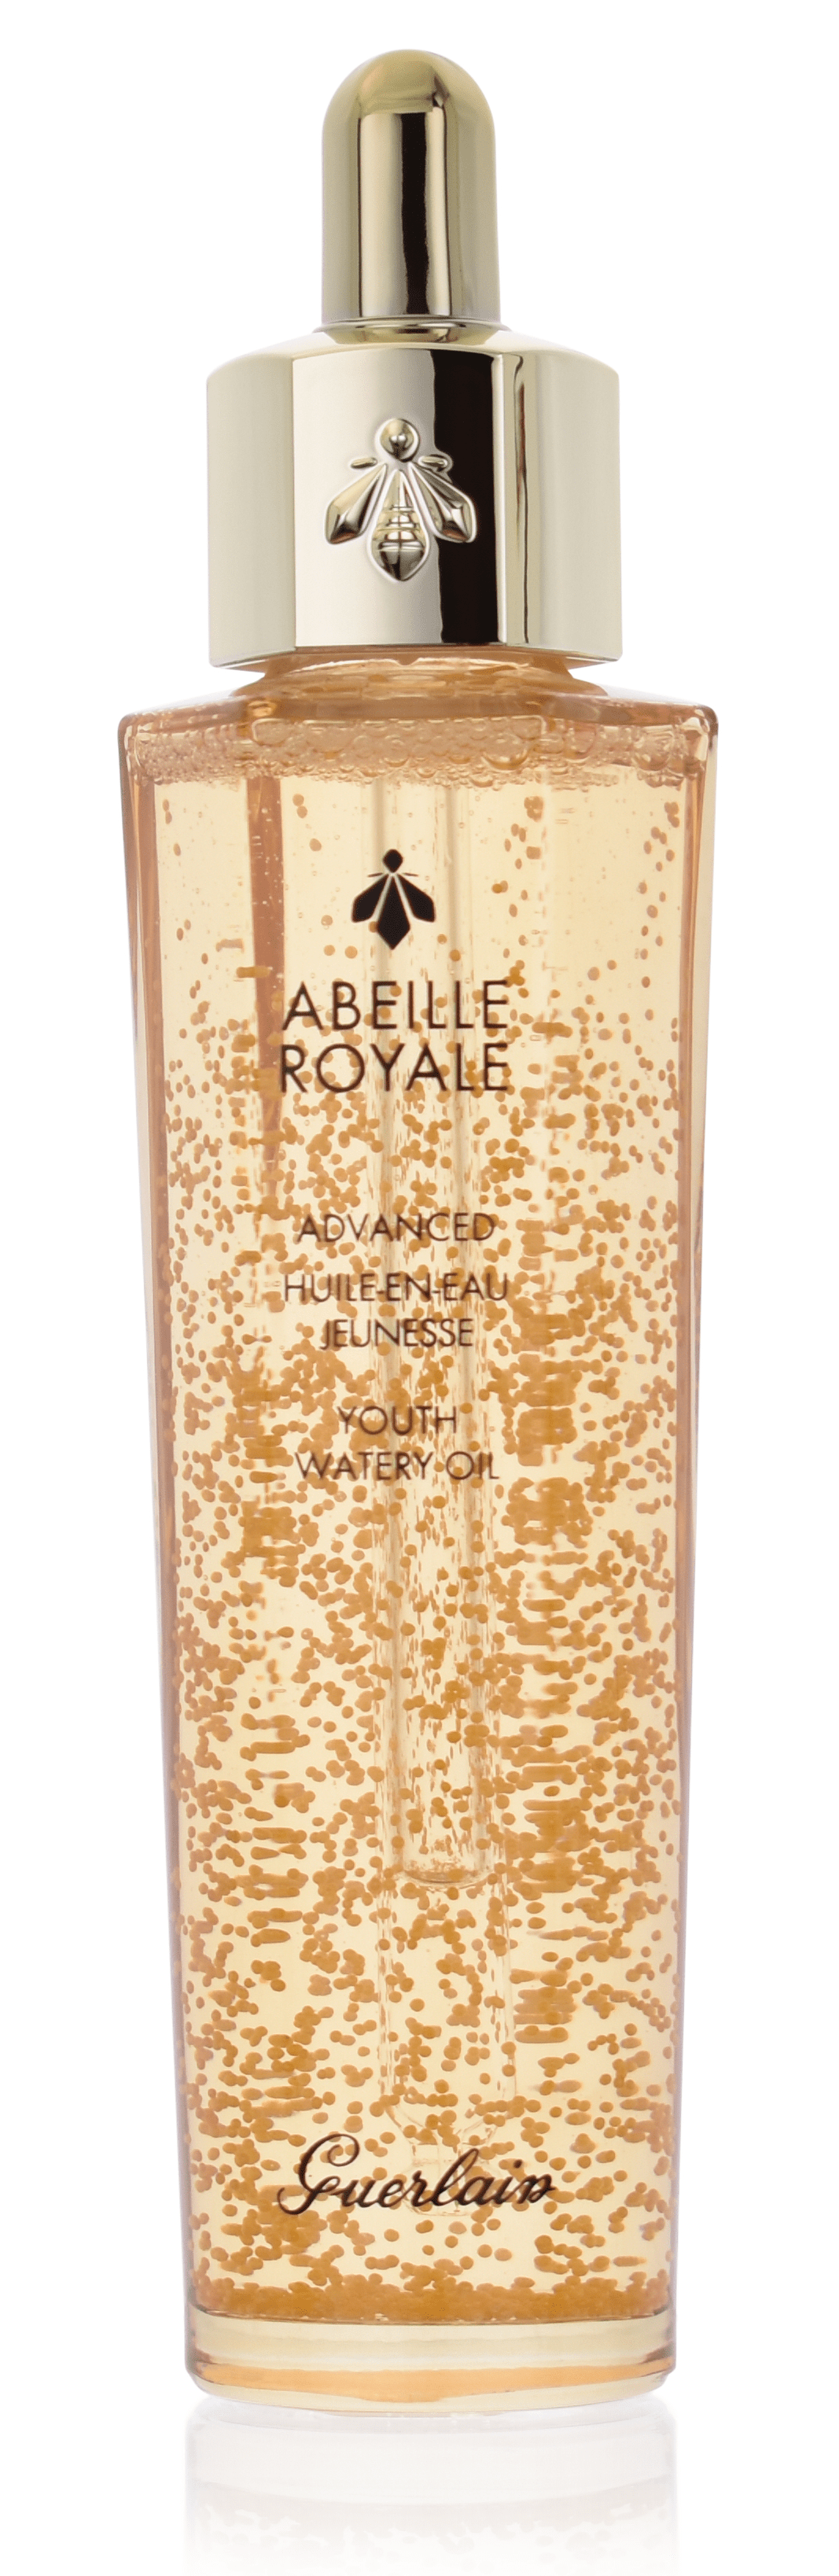 Guerlain Abeille Royale Advanced Youth Watery Oil 50 ml  